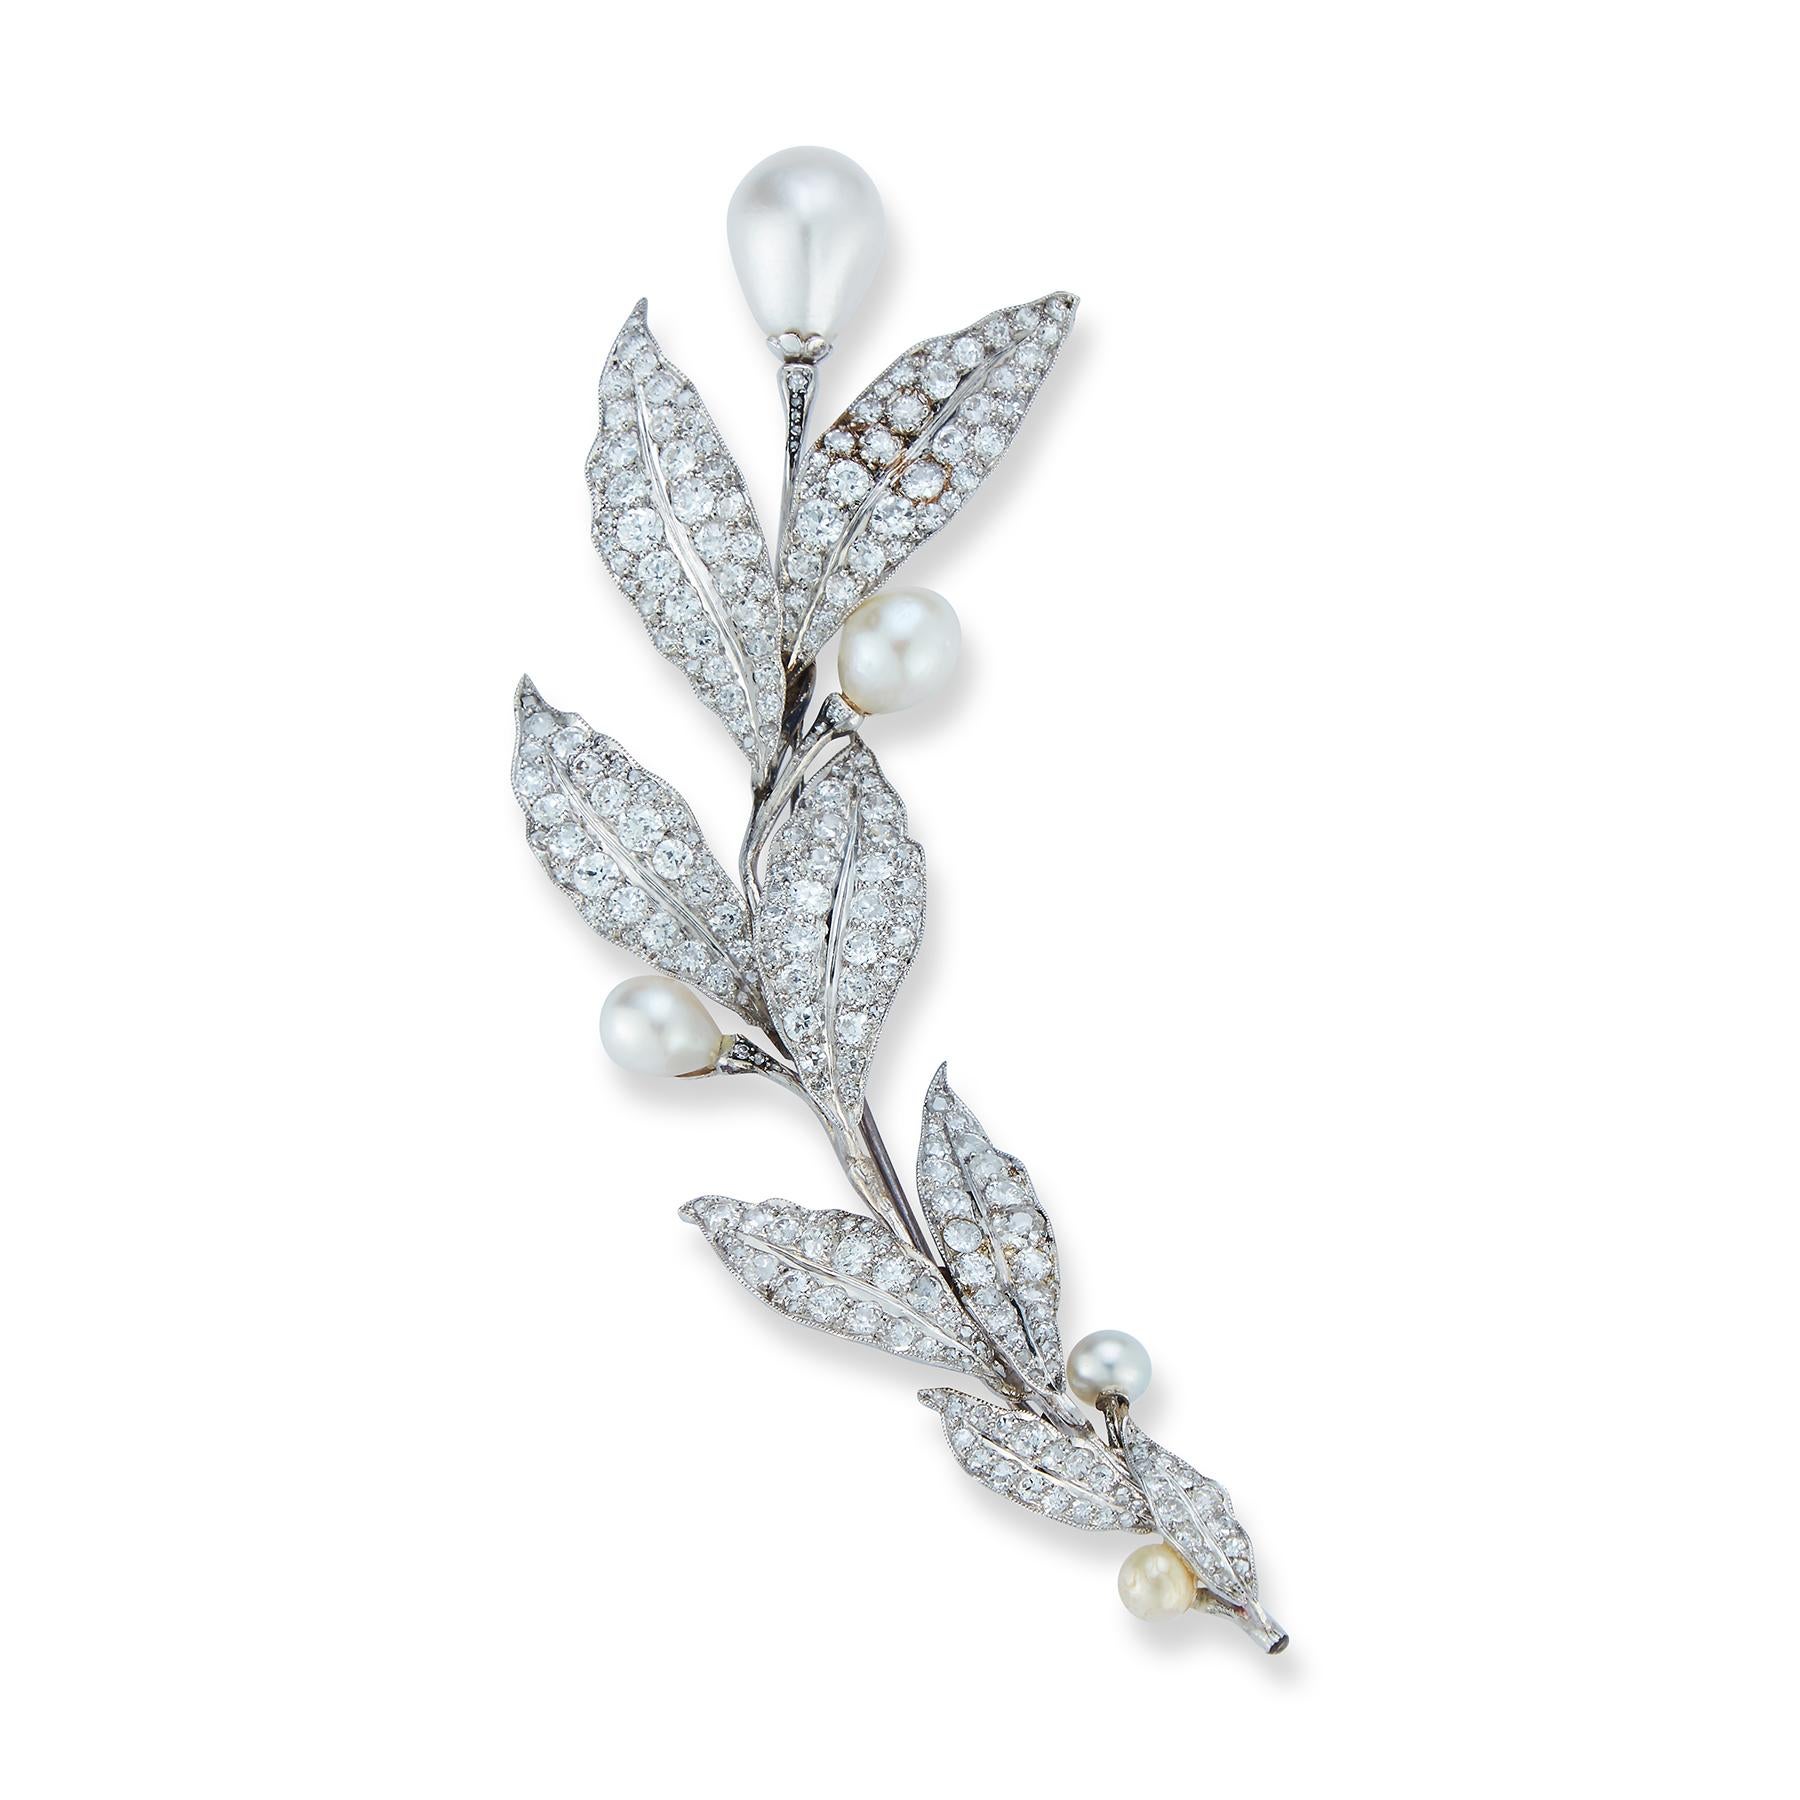 Belle Époque Natural Pearl and Diamond Flower Brooch or Hairpiece

4 certified natural pearls with pave diamond leaves set in platinum
1 synthetic pearl

Measurements: 4